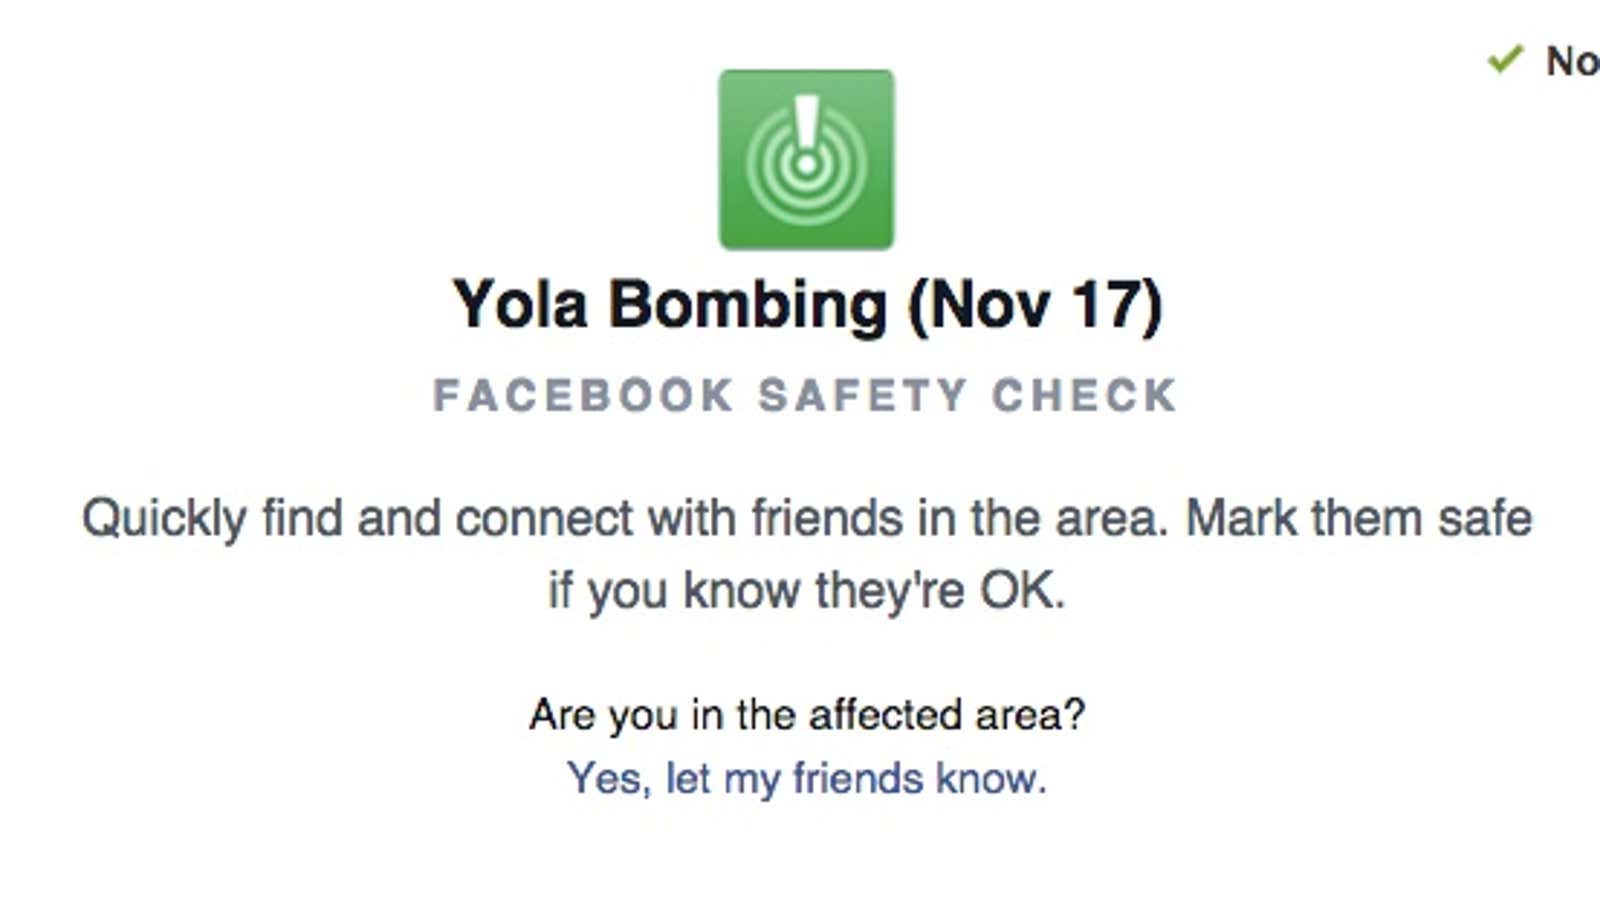 Facebook has activated its “safety check” feature to allow users in Yola, NIgeria to let their friends know they are safe.